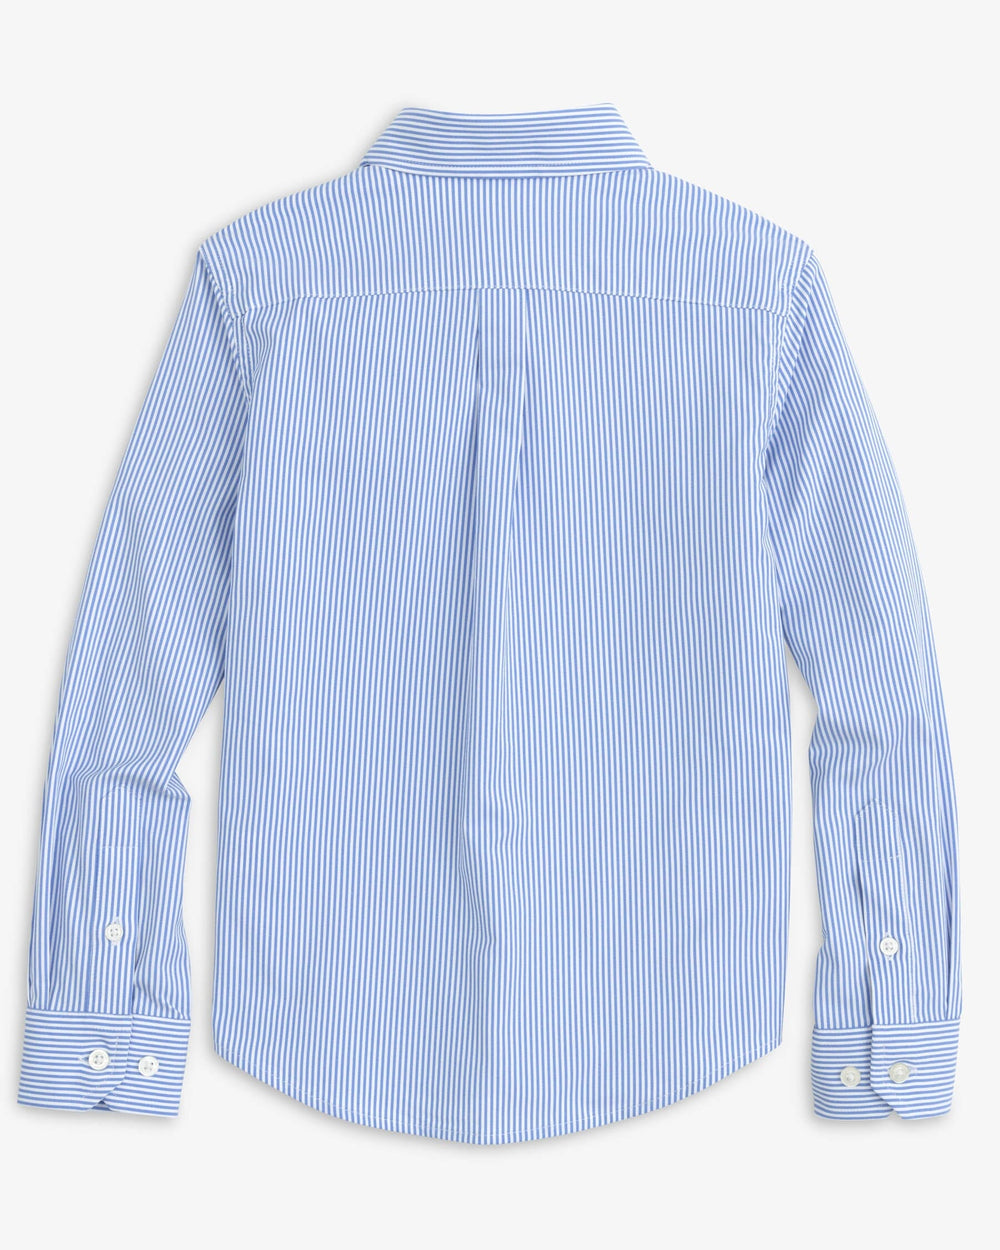 The back view of the Southern Tide Youth Bengal Stripe Intercoastal Sport Shirt by Southern Tide - Cobalt Blue